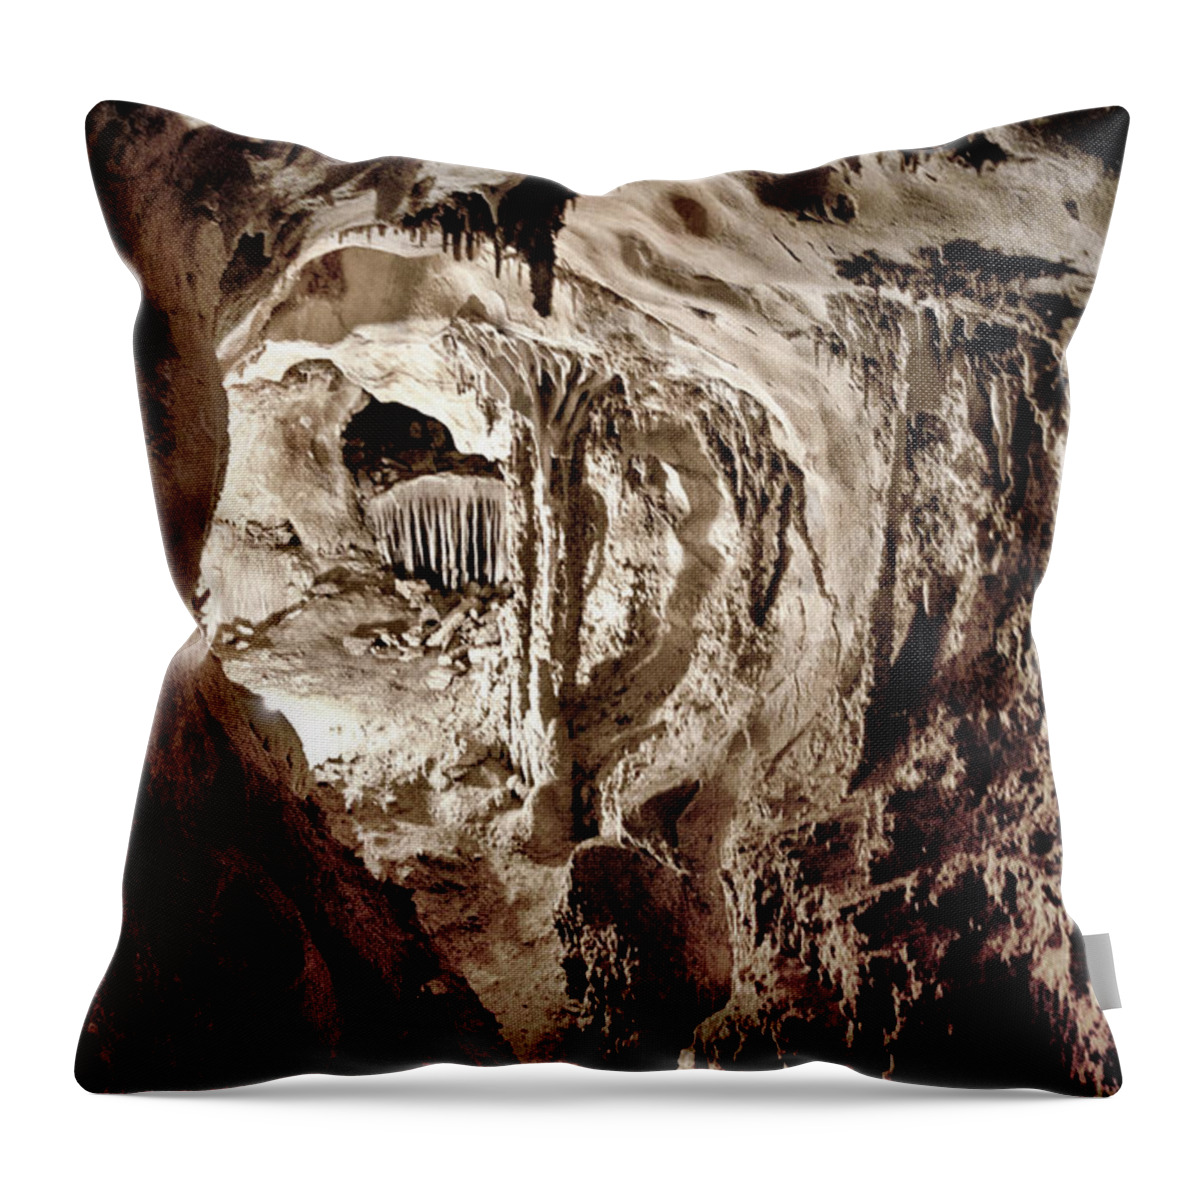 Cave Throw Pillow featuring the photograph Dragons Lair by Robert Woodward